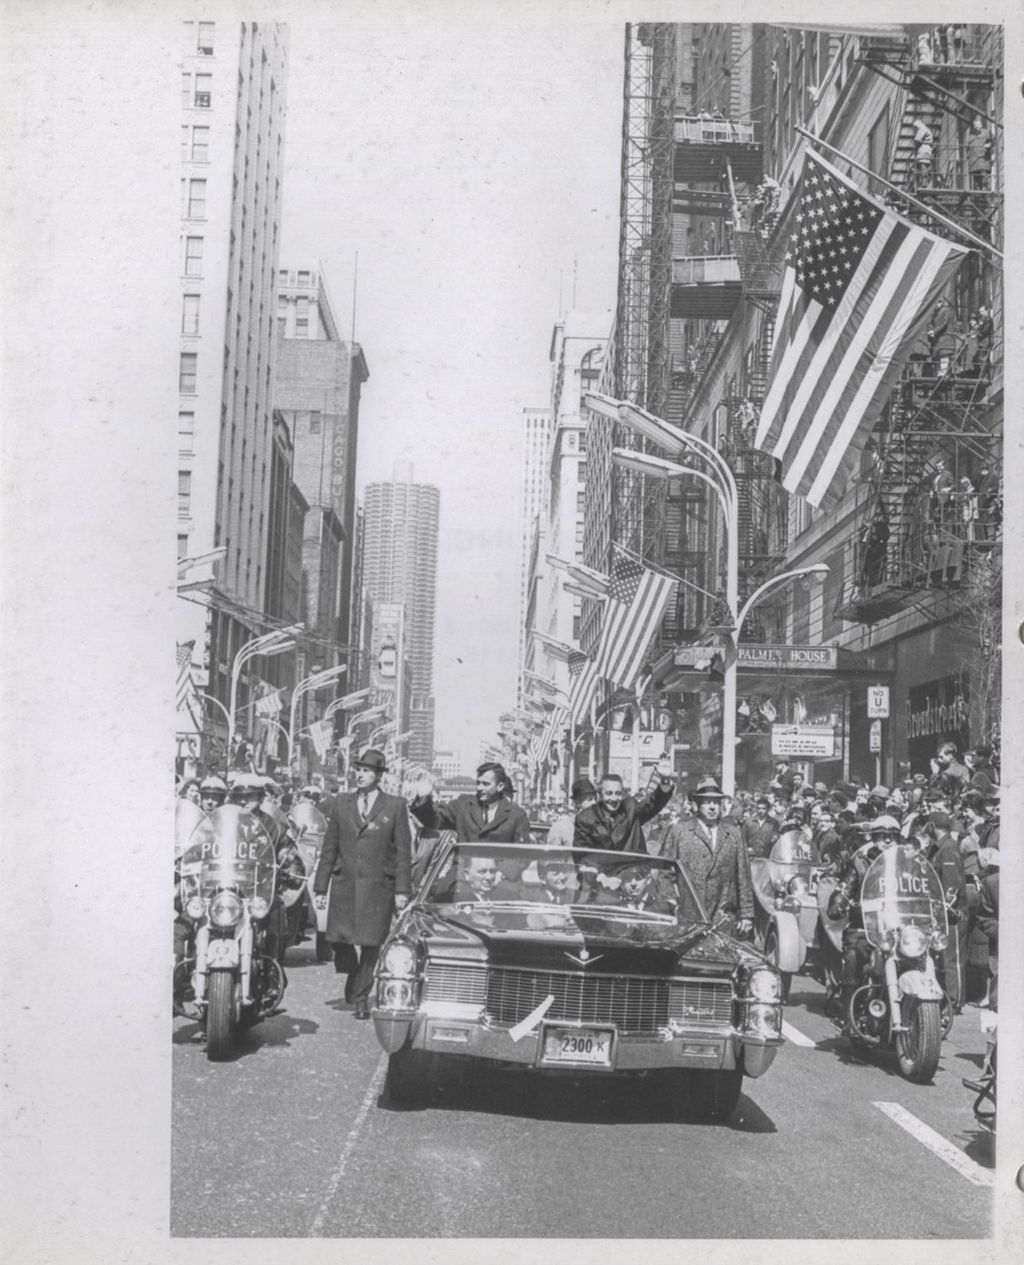 Miniature of Astronauts Young and Grissom waving to the crowd during a parade